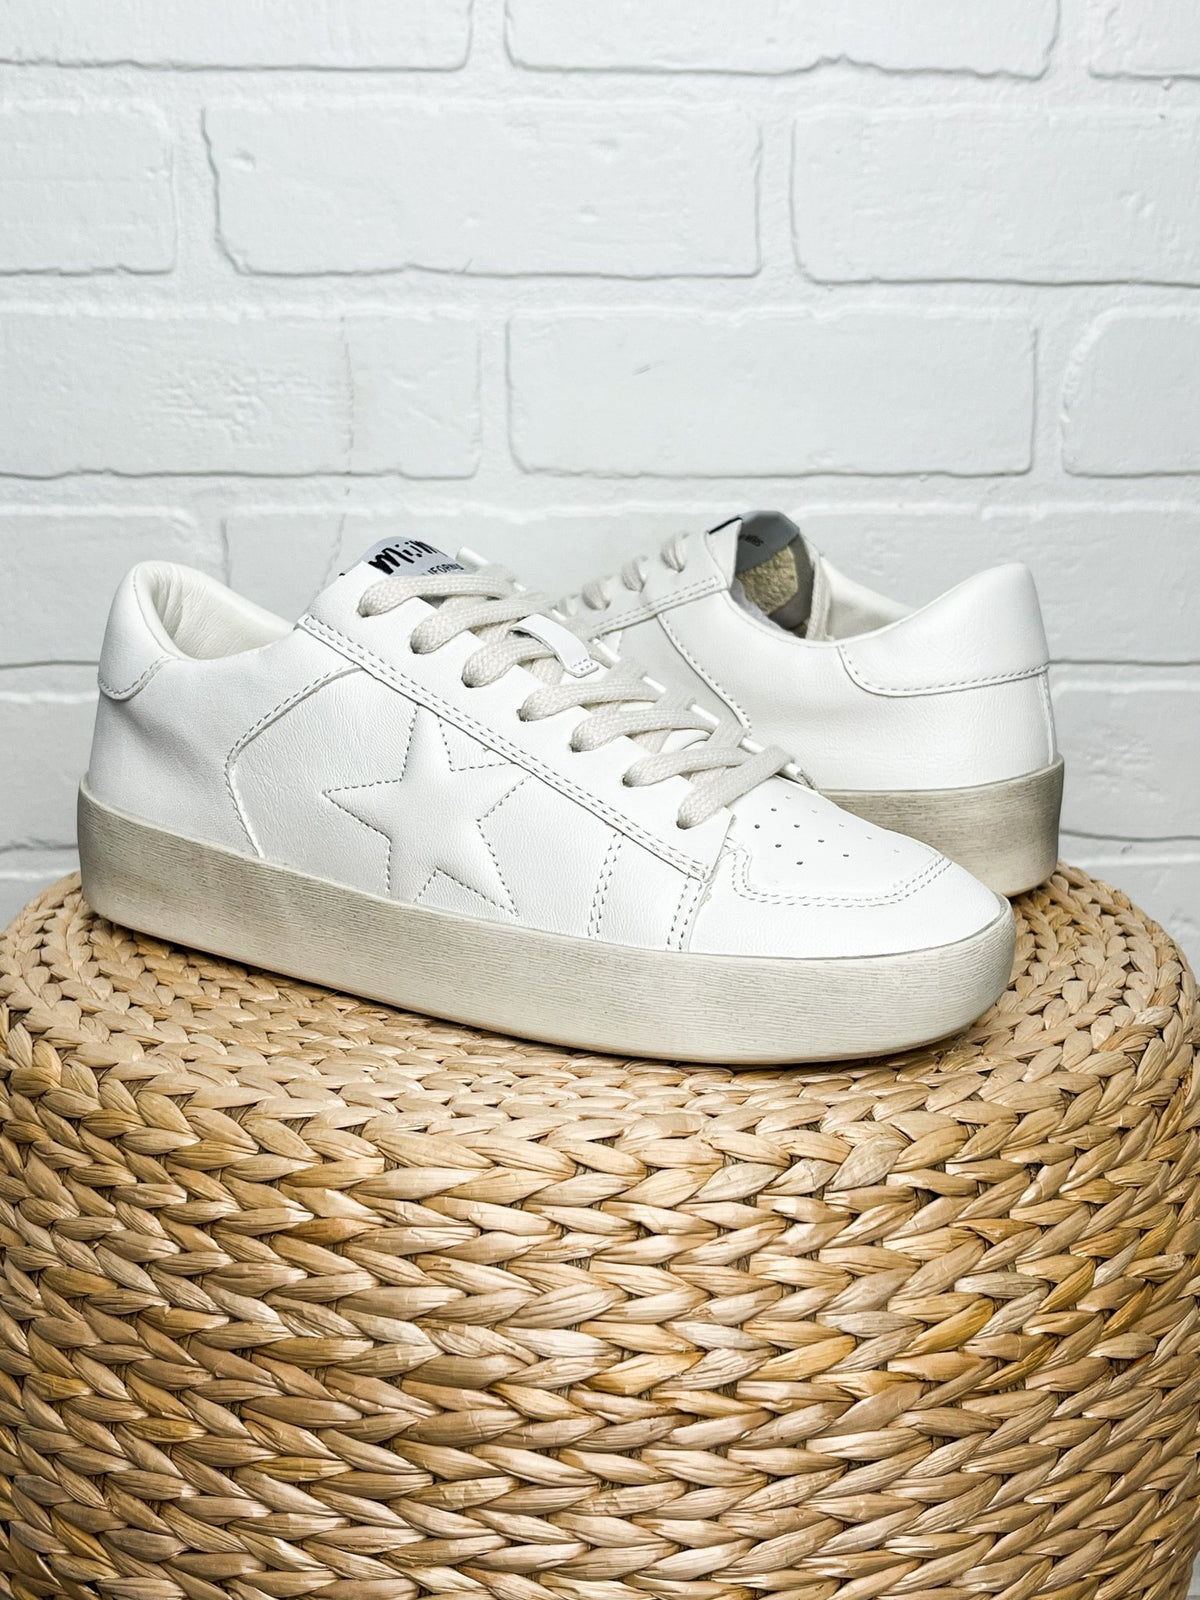 Alex star sneaker white - Cute Shoes - Trendy Shoes at Lush Fashion Lounge Boutique in Oklahoma City